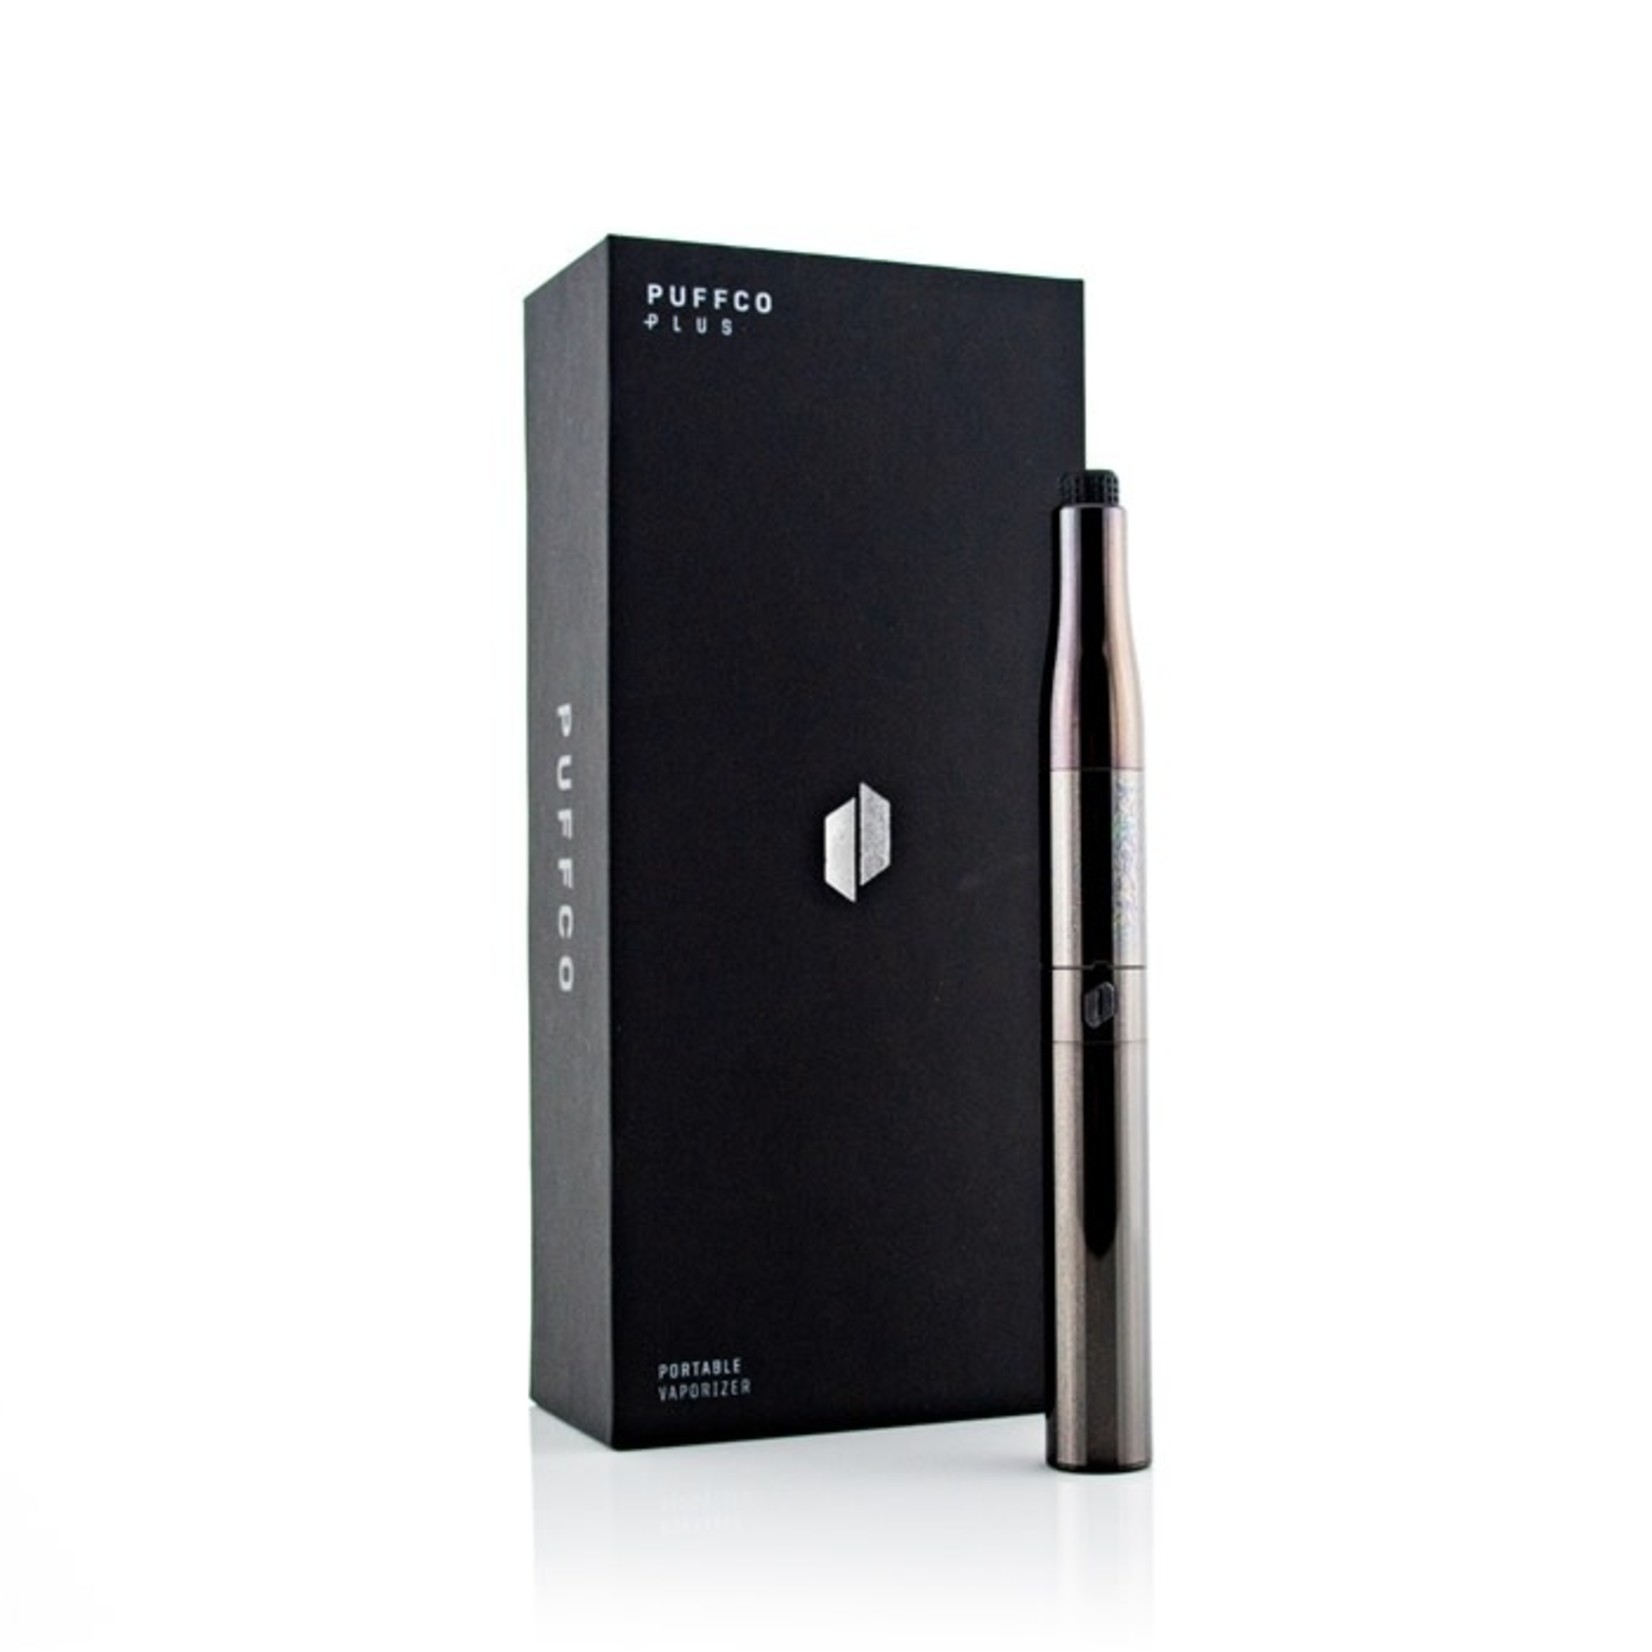 Puffco Puffco Vision Plus Concentrate Vaporizer